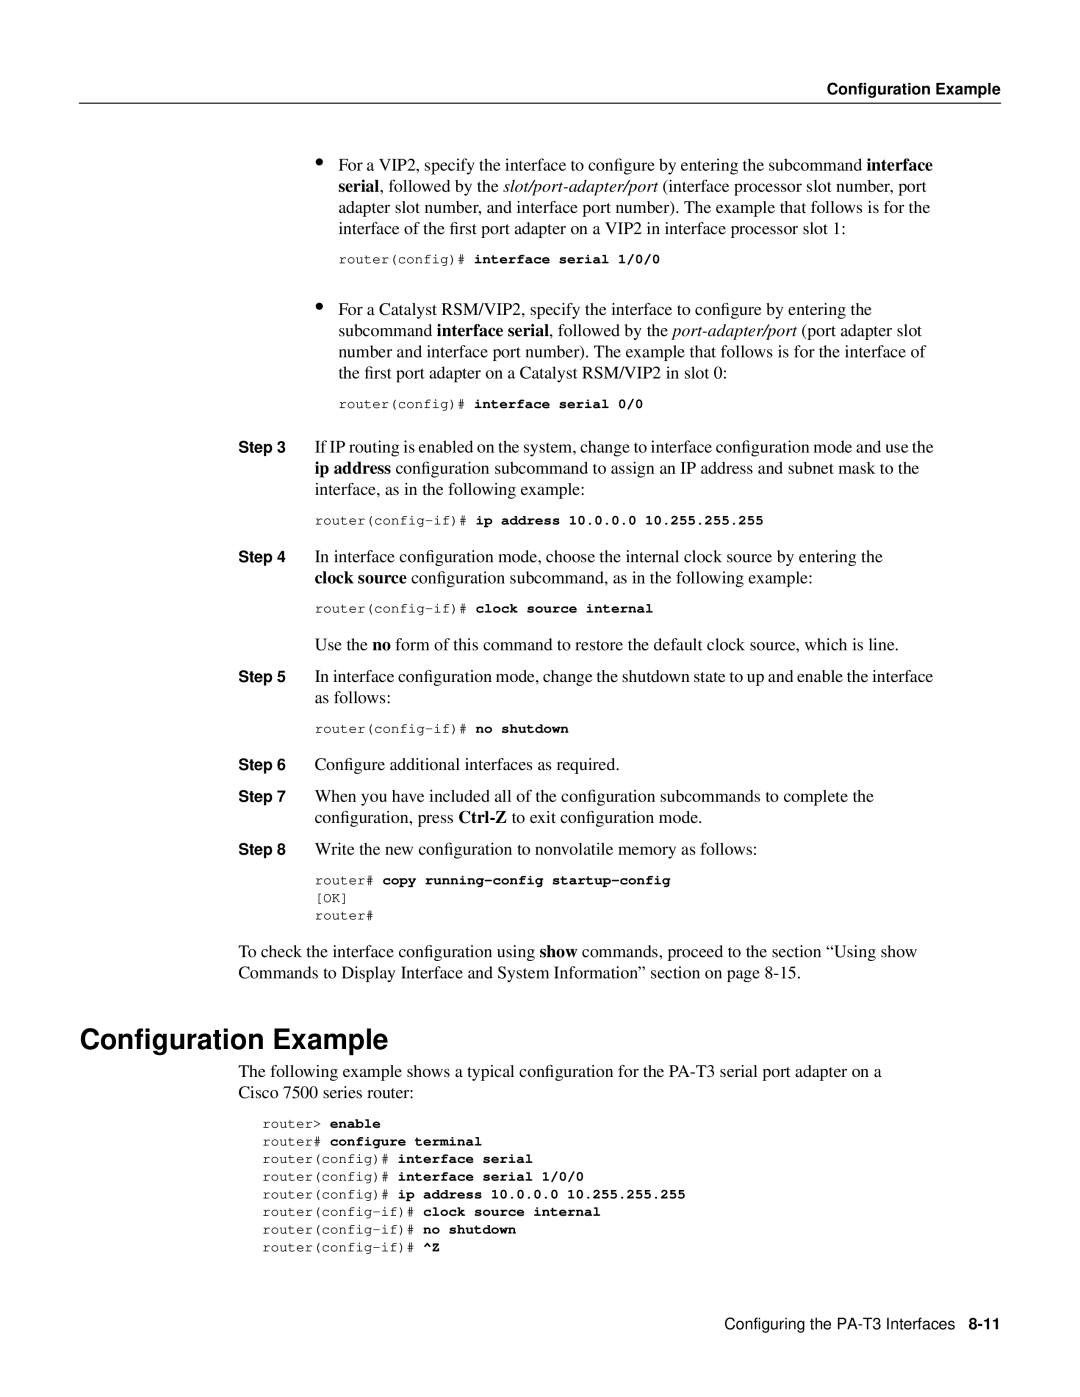 Cisco Systems PA-T3 manual Conﬁguration Example 